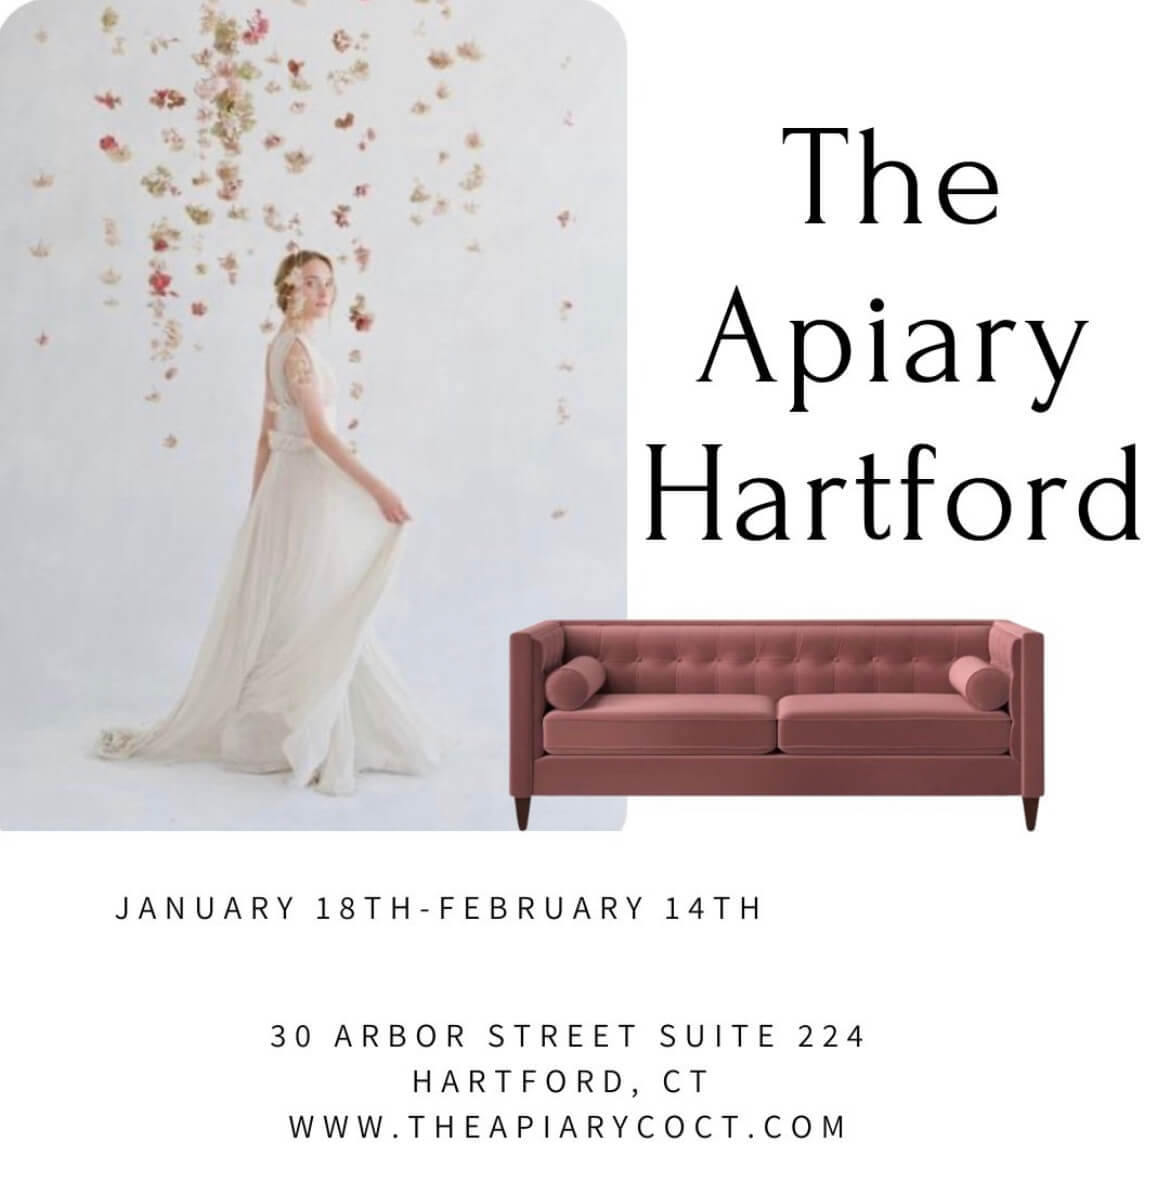 A flyer for the apiary in Hartford